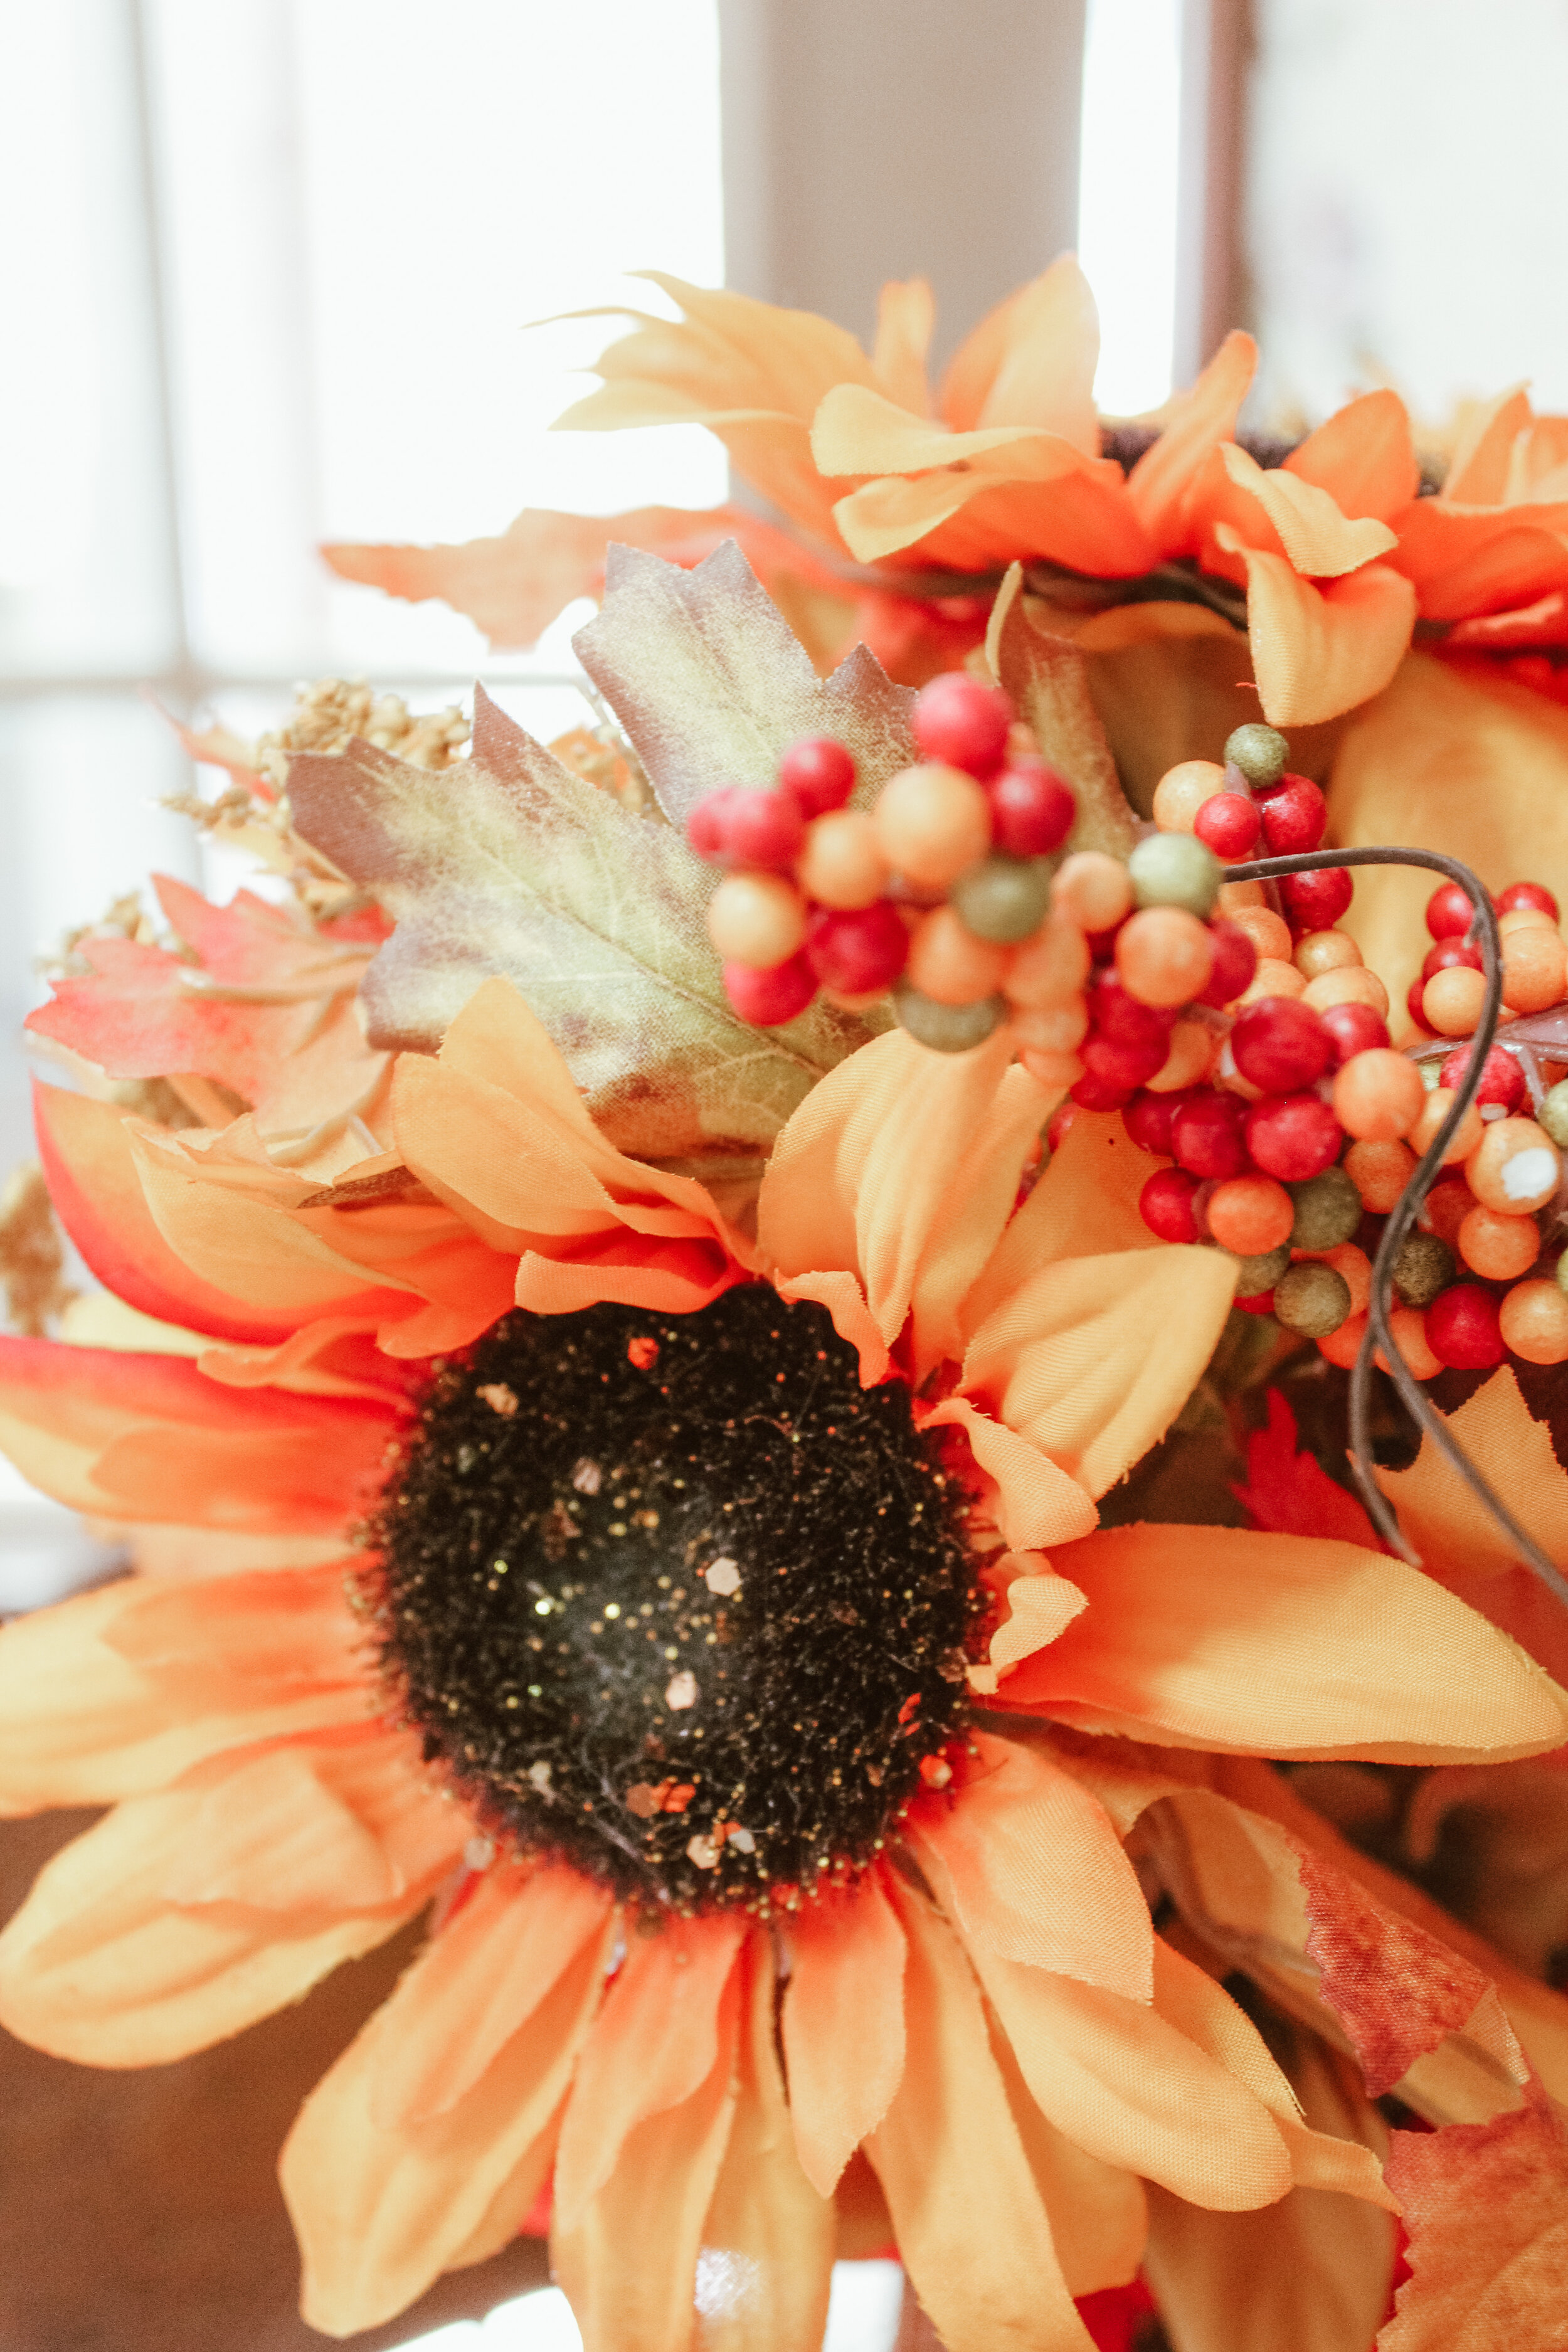 Fall decorations can be seen from east to west in homes across America during Thanksgiving. Yet, many take the decorations down after Thanksgiving in preparation for the Christmas season.